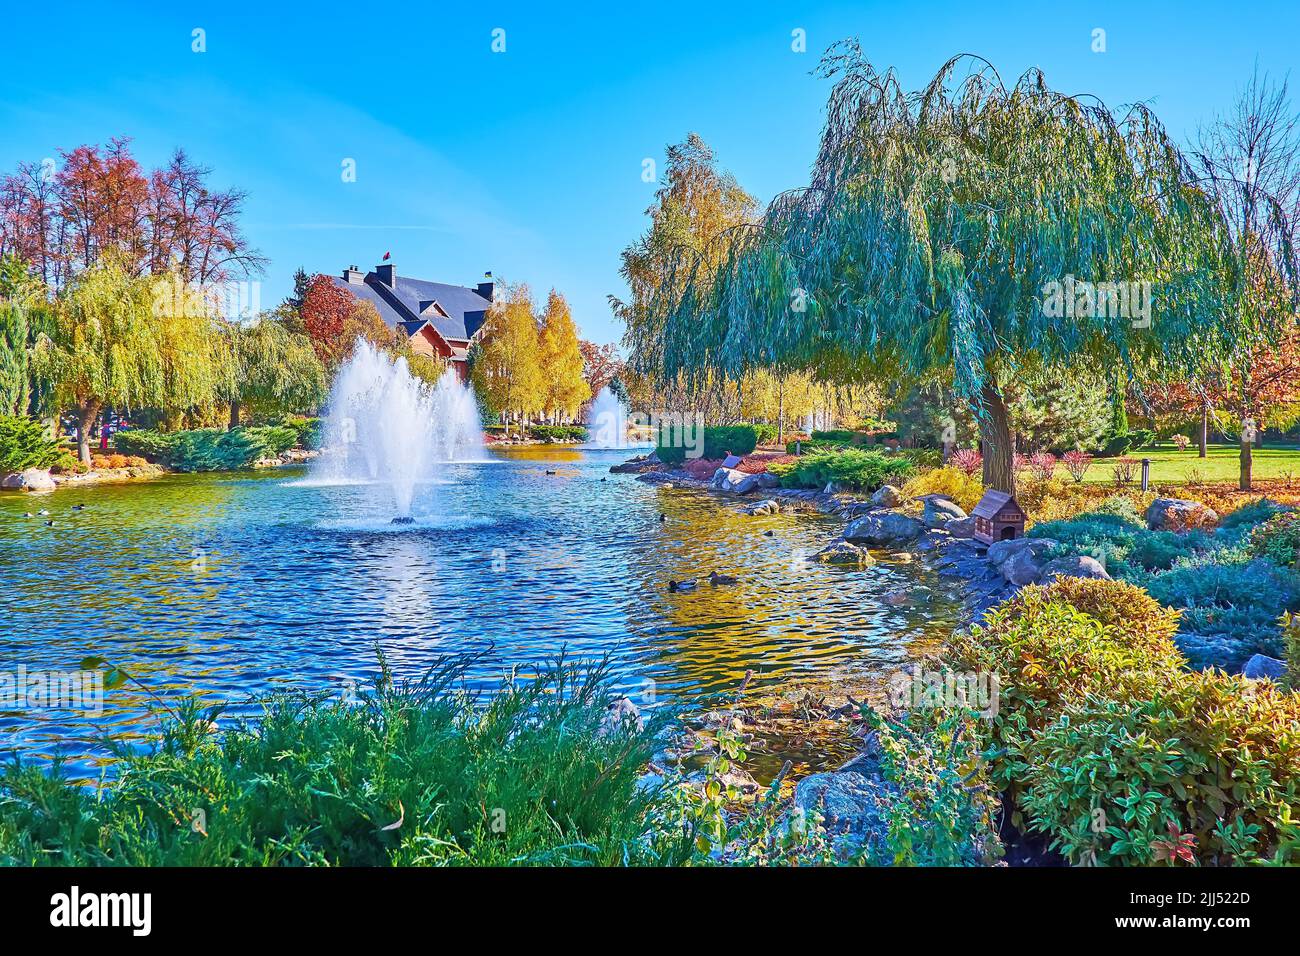 Idyllic autumn park with lush willows, yellow birches, red oaks, thickets of juniper and lake with fountains, Mezhyhirya, Ukraine Stock Photo